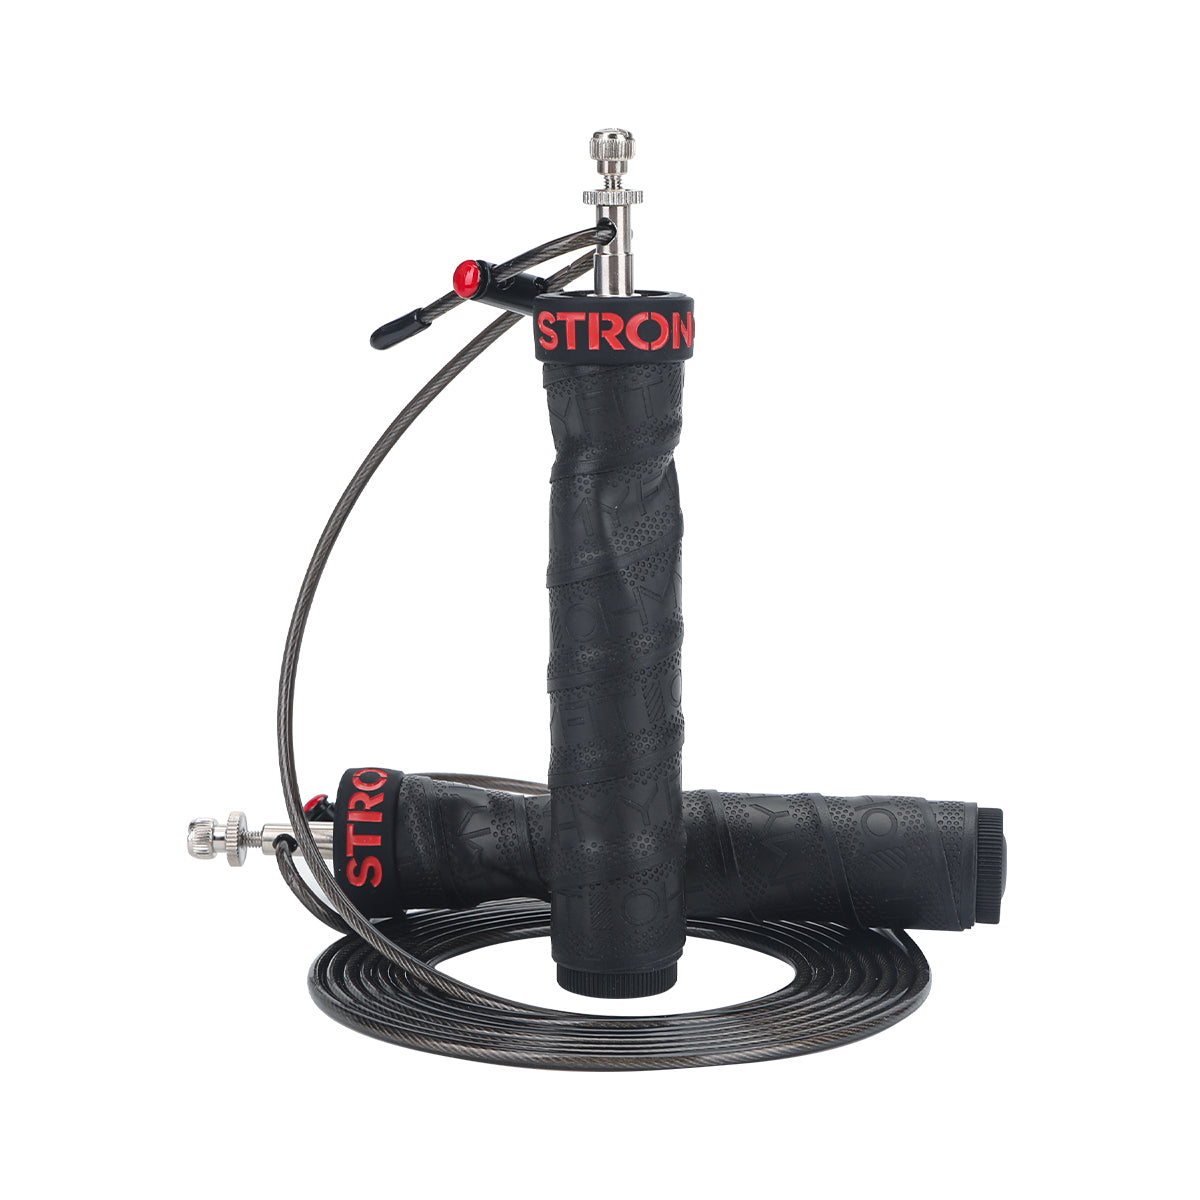 OHMY FIT STRONG Adjustable Speed and Weight Jump Rope